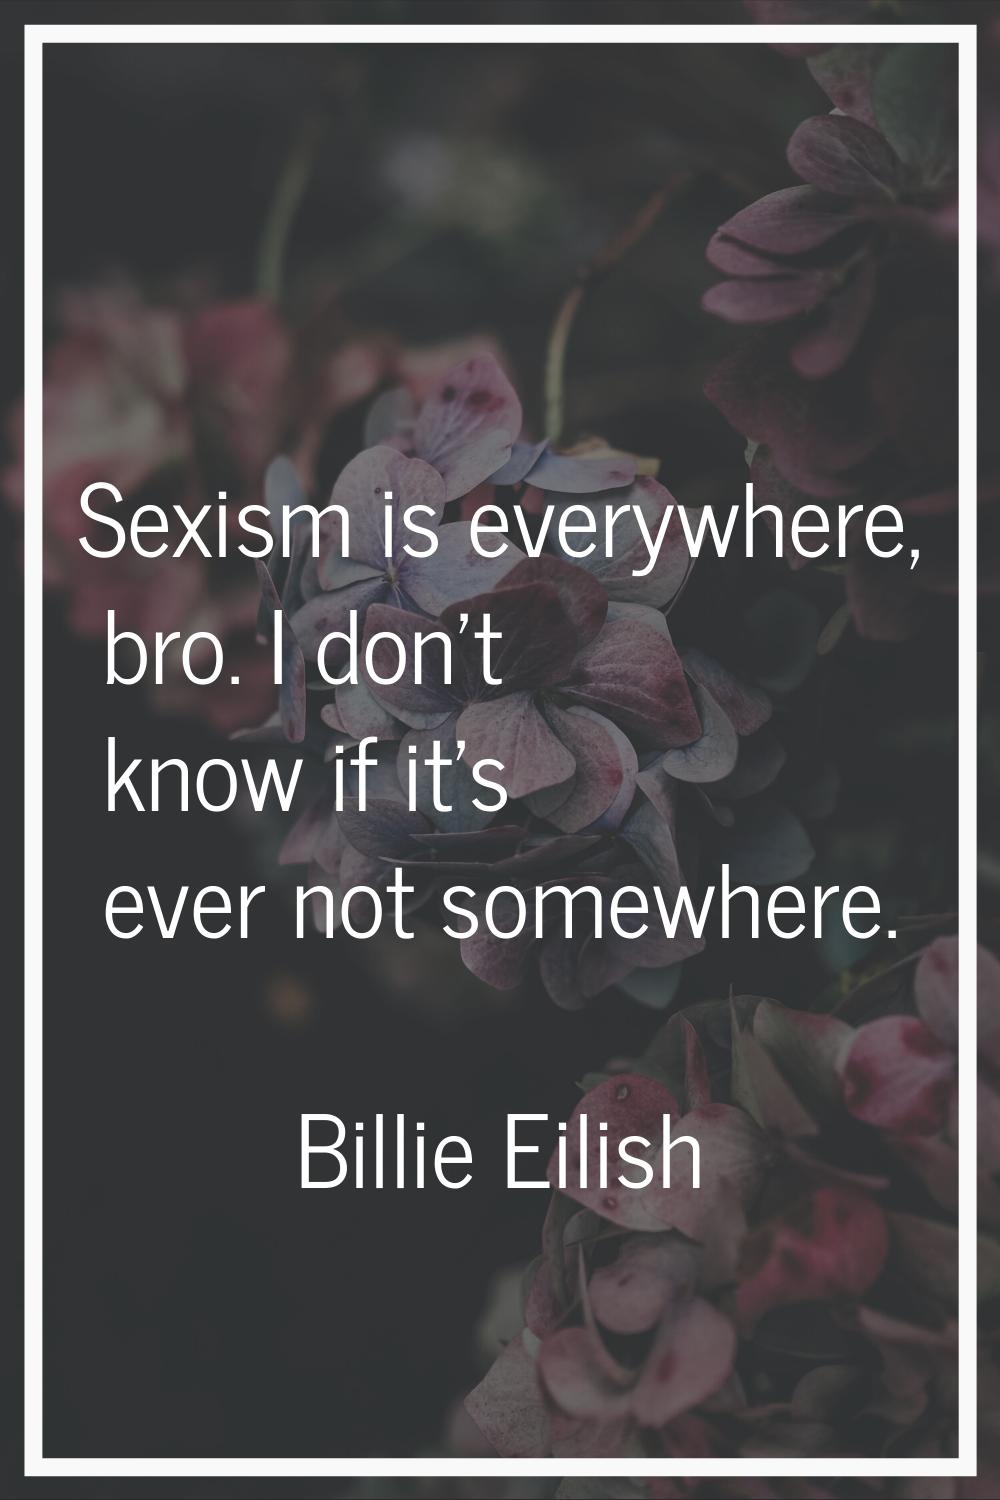 Sexism is everywhere, bro. I don't know if it's ever not somewhere.